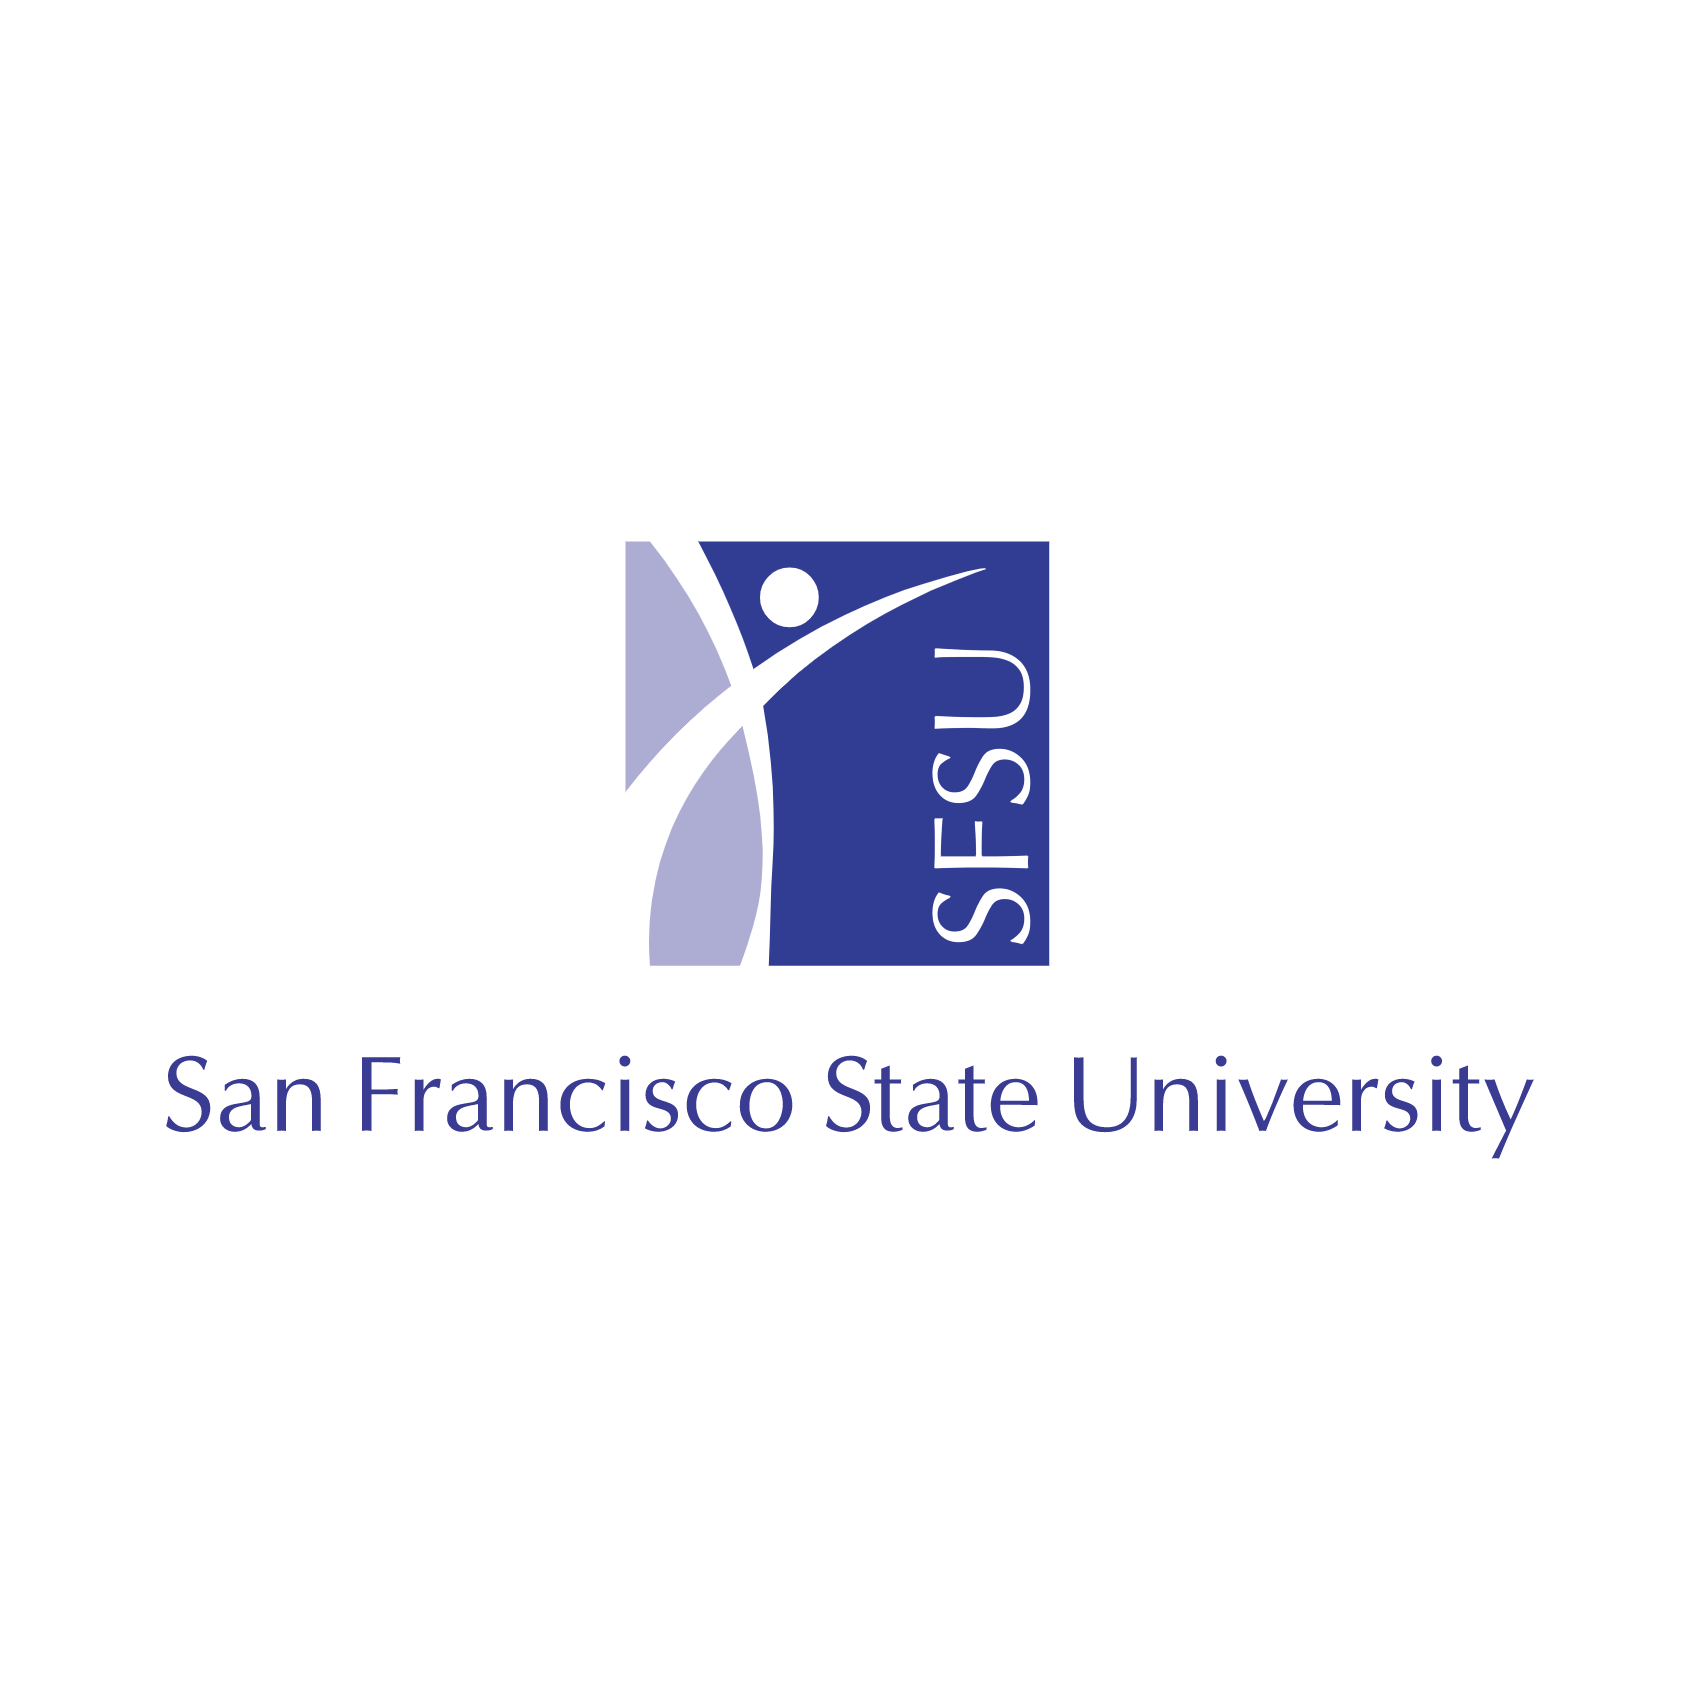 Download SFSU San Francisco State University Logo PNG and Vector (PDF